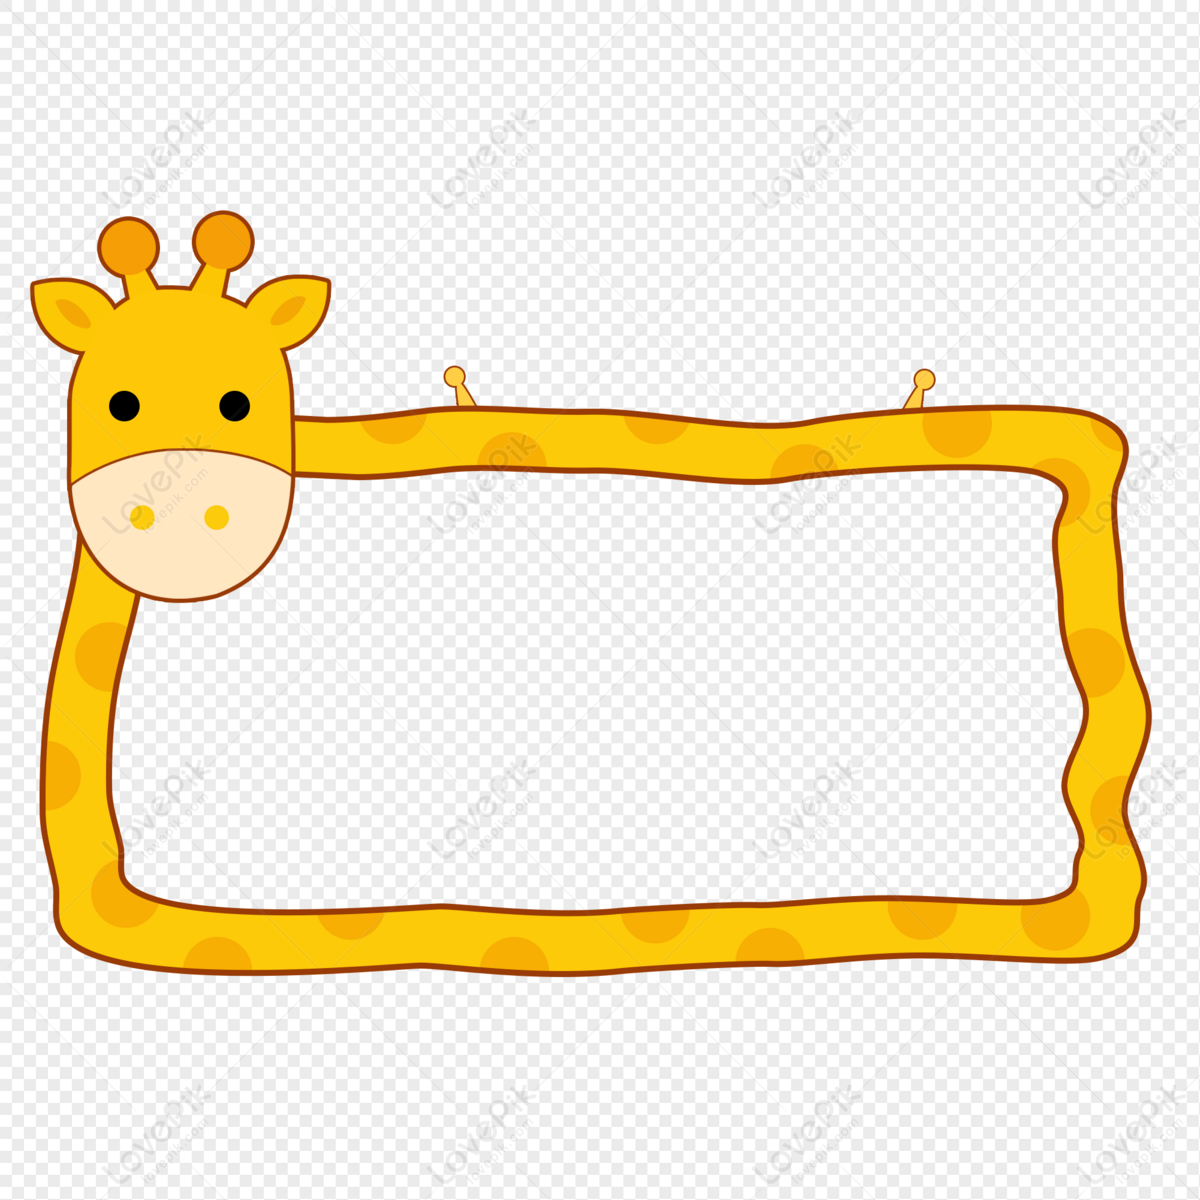 Cartoon Animal Deer Head Border PNG Image And Clipart Image For Free  Download - Lovepik | 401441478